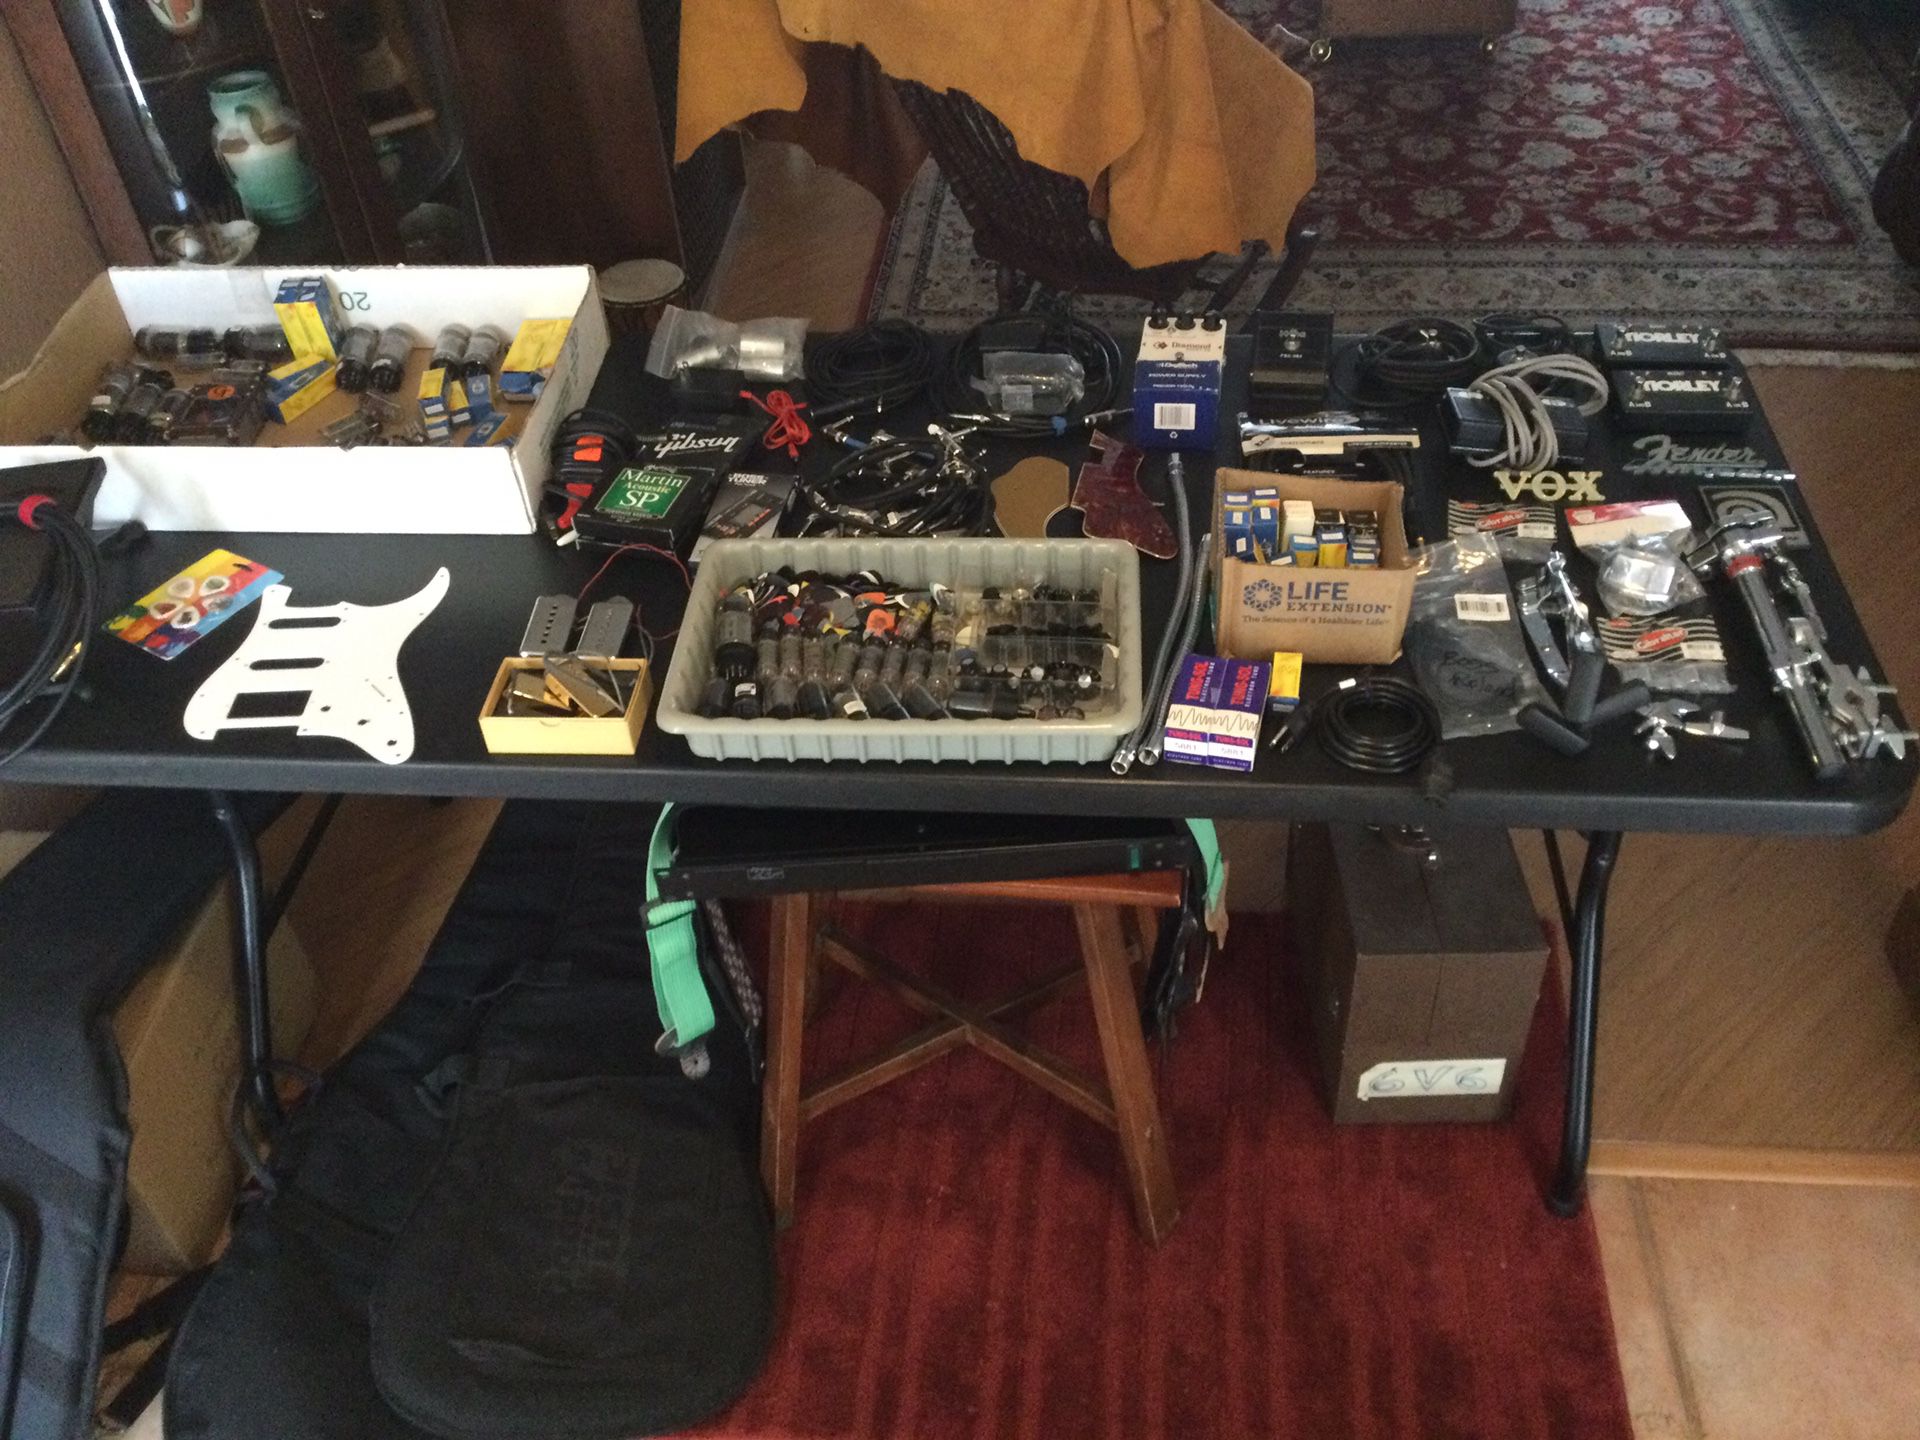 Lots of music items added daily…Guitar, Pro Audio, Drums Howrah, Tubes,Tubes, Tubes & More!